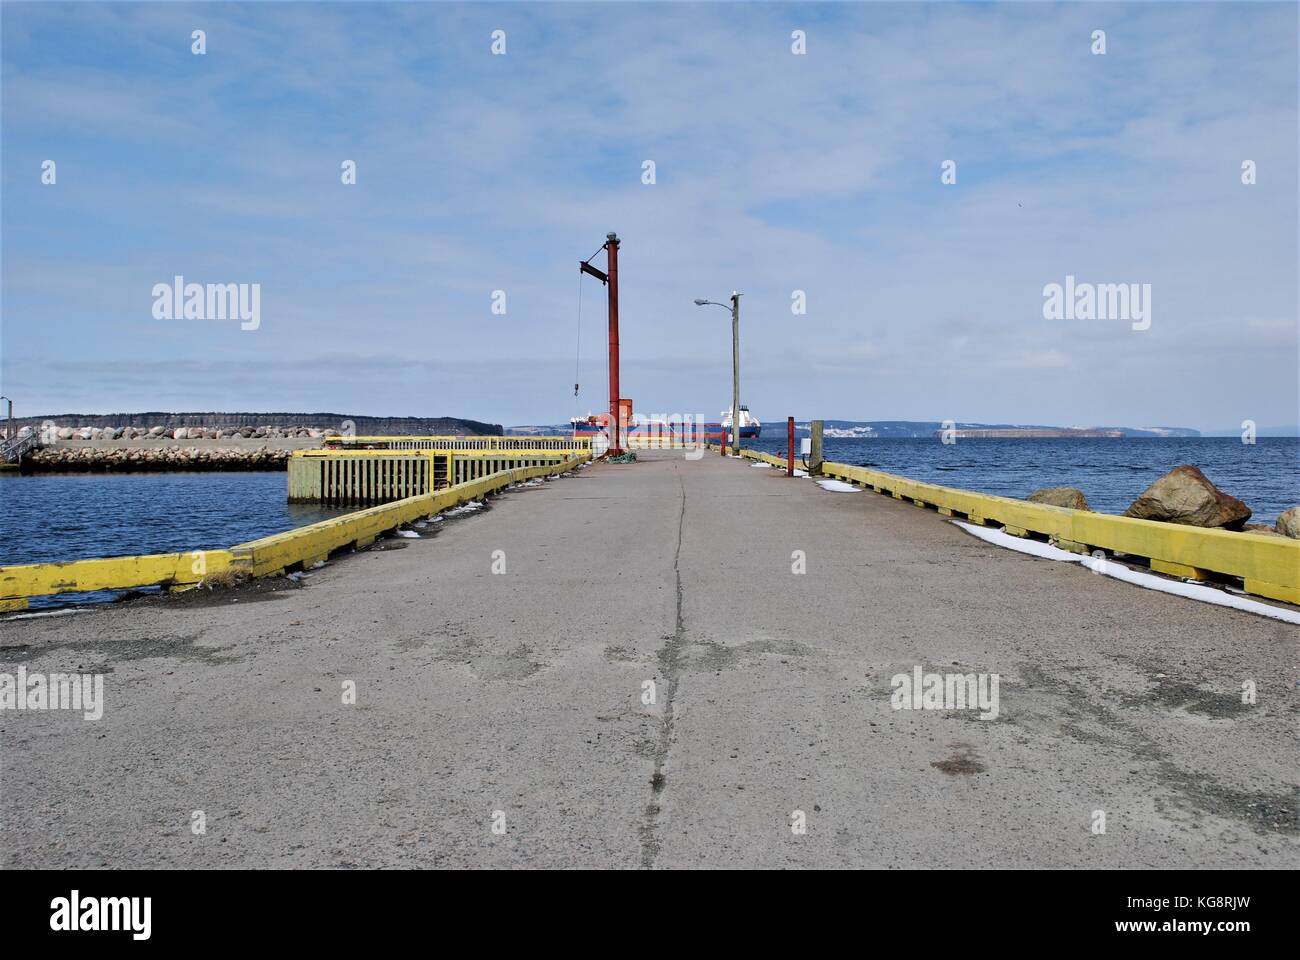 Looking along the length of a pier to where an oil tanker is crossing Conception Bay, Foxtrap, Conception Bay South, Newfoundland Labrador, Canada. Stock Photo